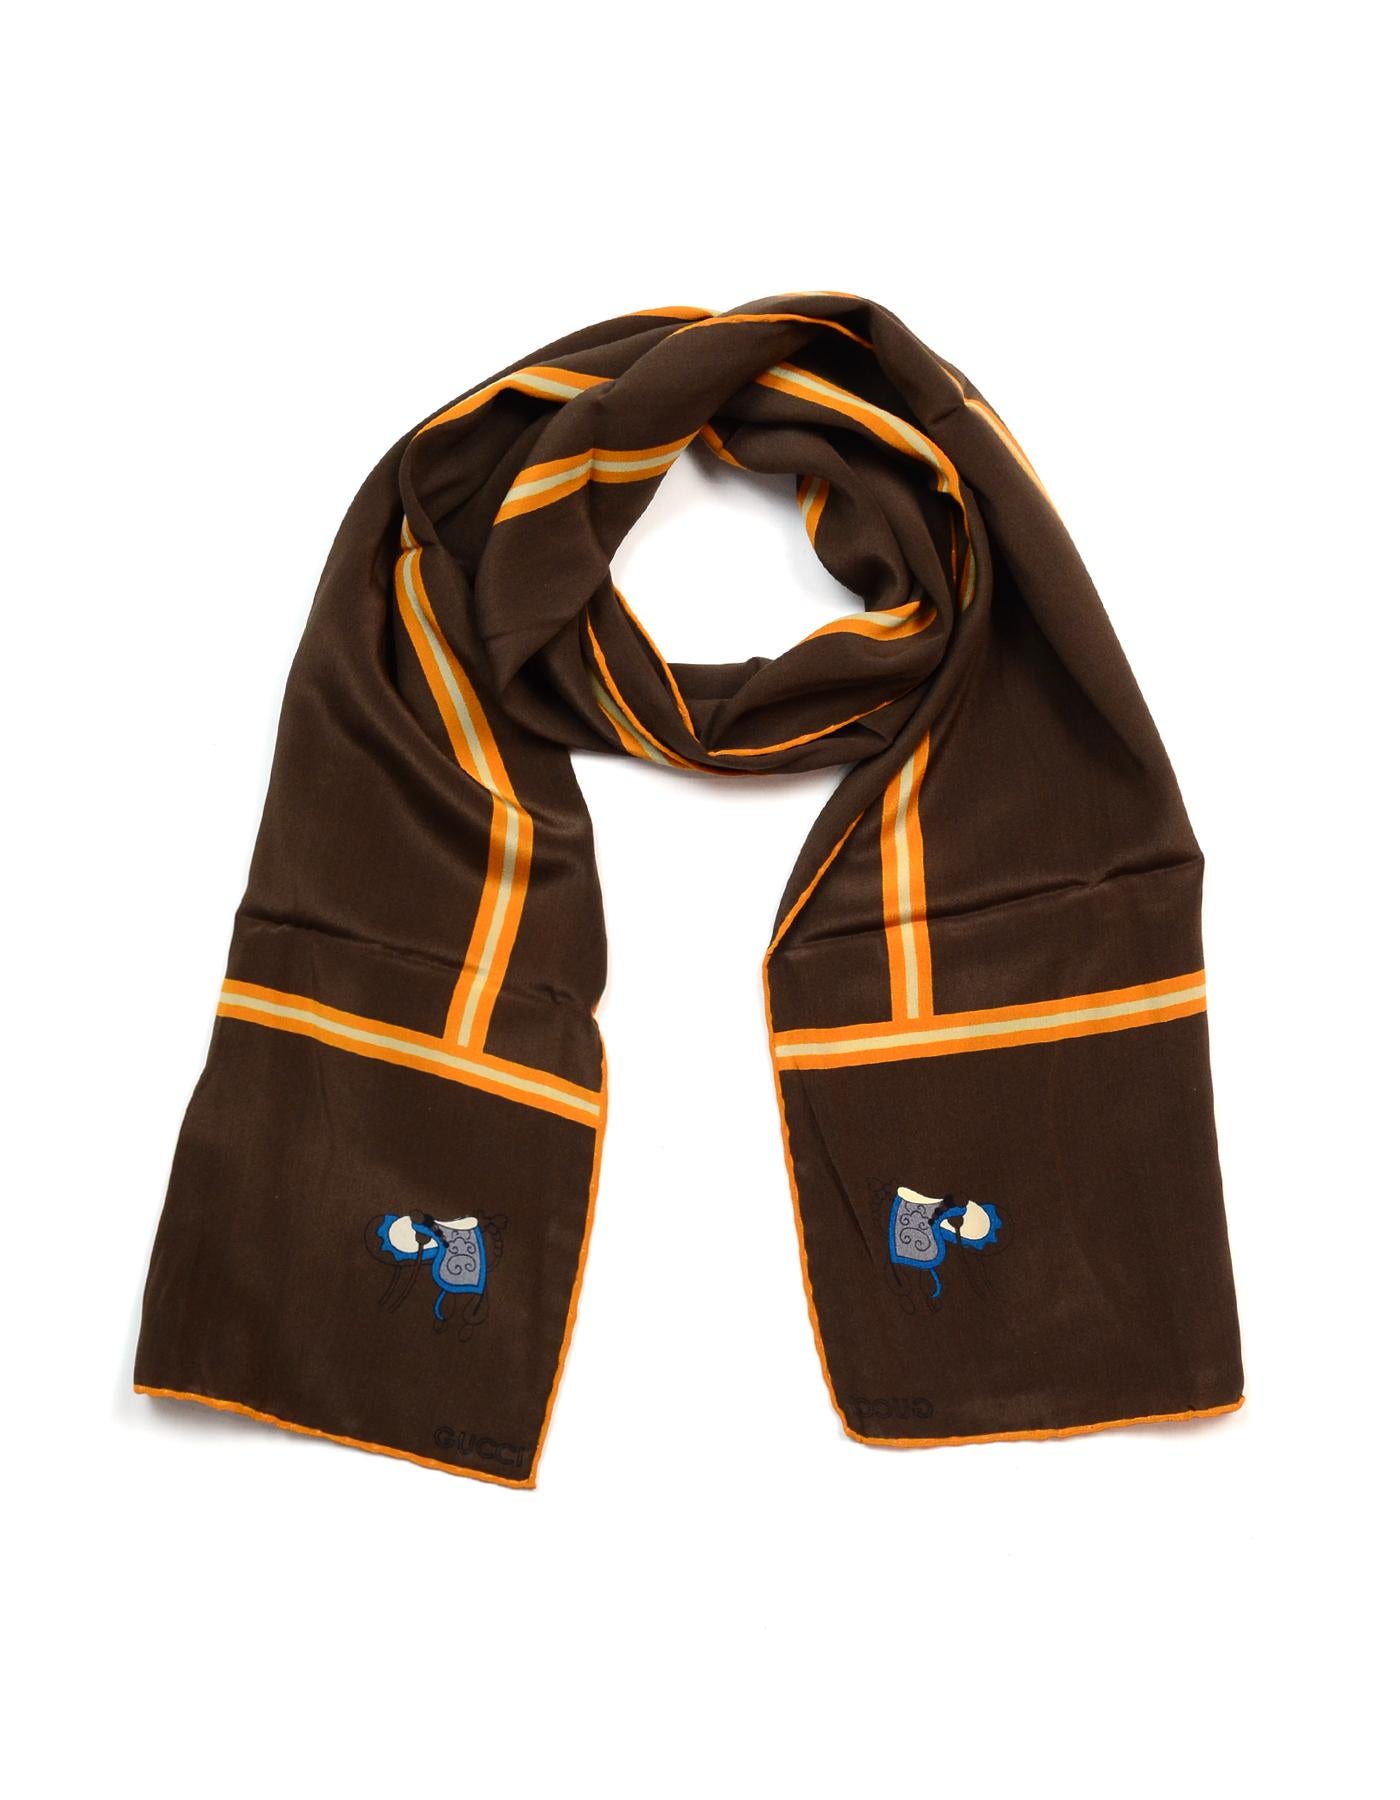 Gucci Vintage Brown/Orange Silk Long Scarf W/ Sleeve

Color: Brown/orange
Materials: Silk (no composition tag)
Overall Condition: Excellent vintage, pre-owned condition
Includes: Gucci cardboard sleeve 

Measurements: 
60